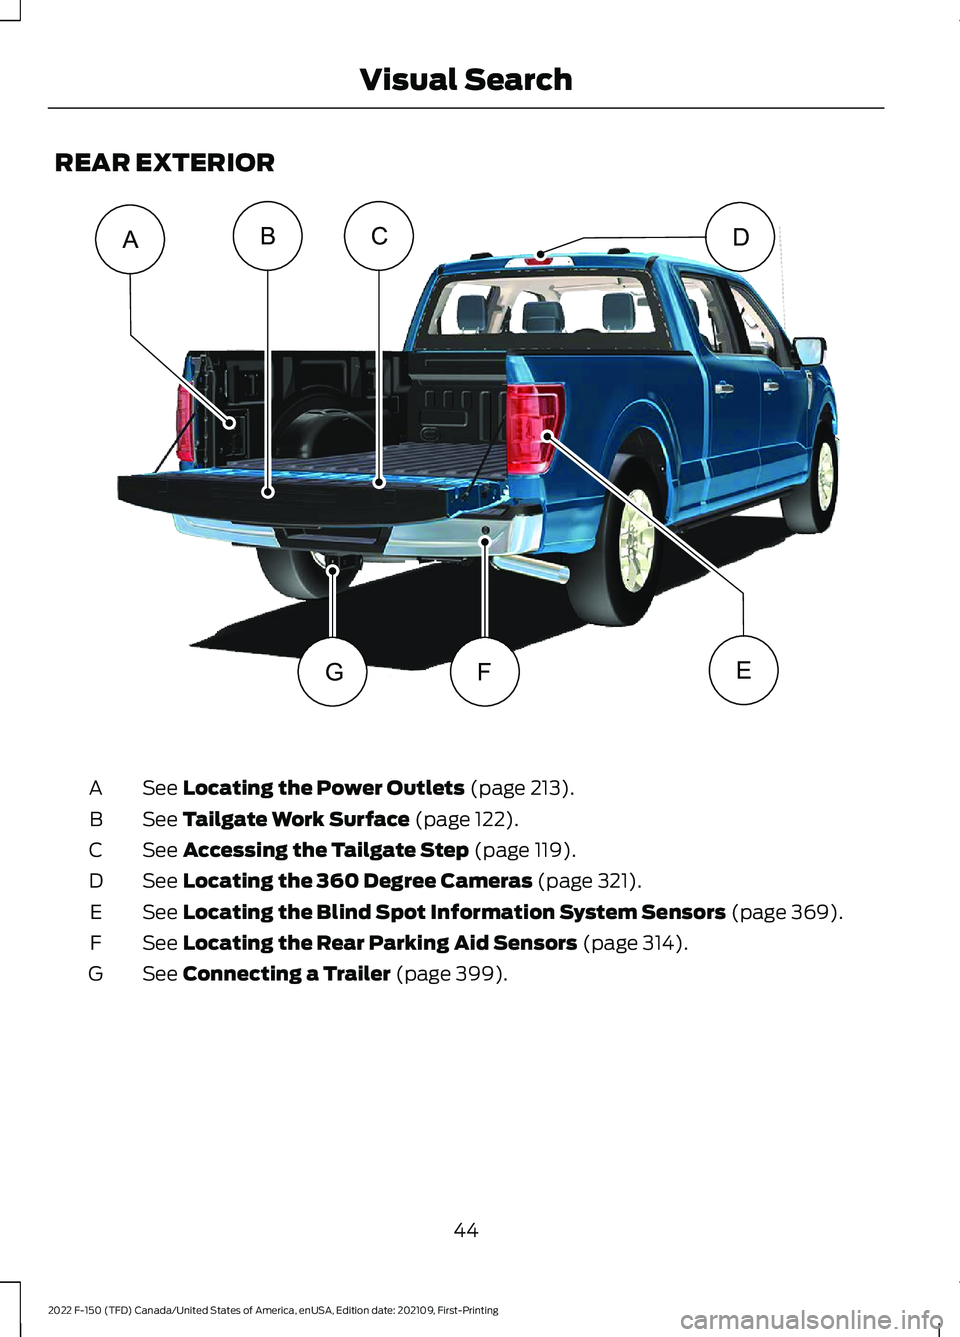 FORD F-150 2022 Service Manual REAR EXTERIOR
See Locating the Power Outlets (page 213).
A
See 
Tailgate Work Surface (page 122).
B
See 
Accessing the Tailgate Step (page 119).
C
See 
Locating the 360 Degree Cameras (page 321).
D
Se